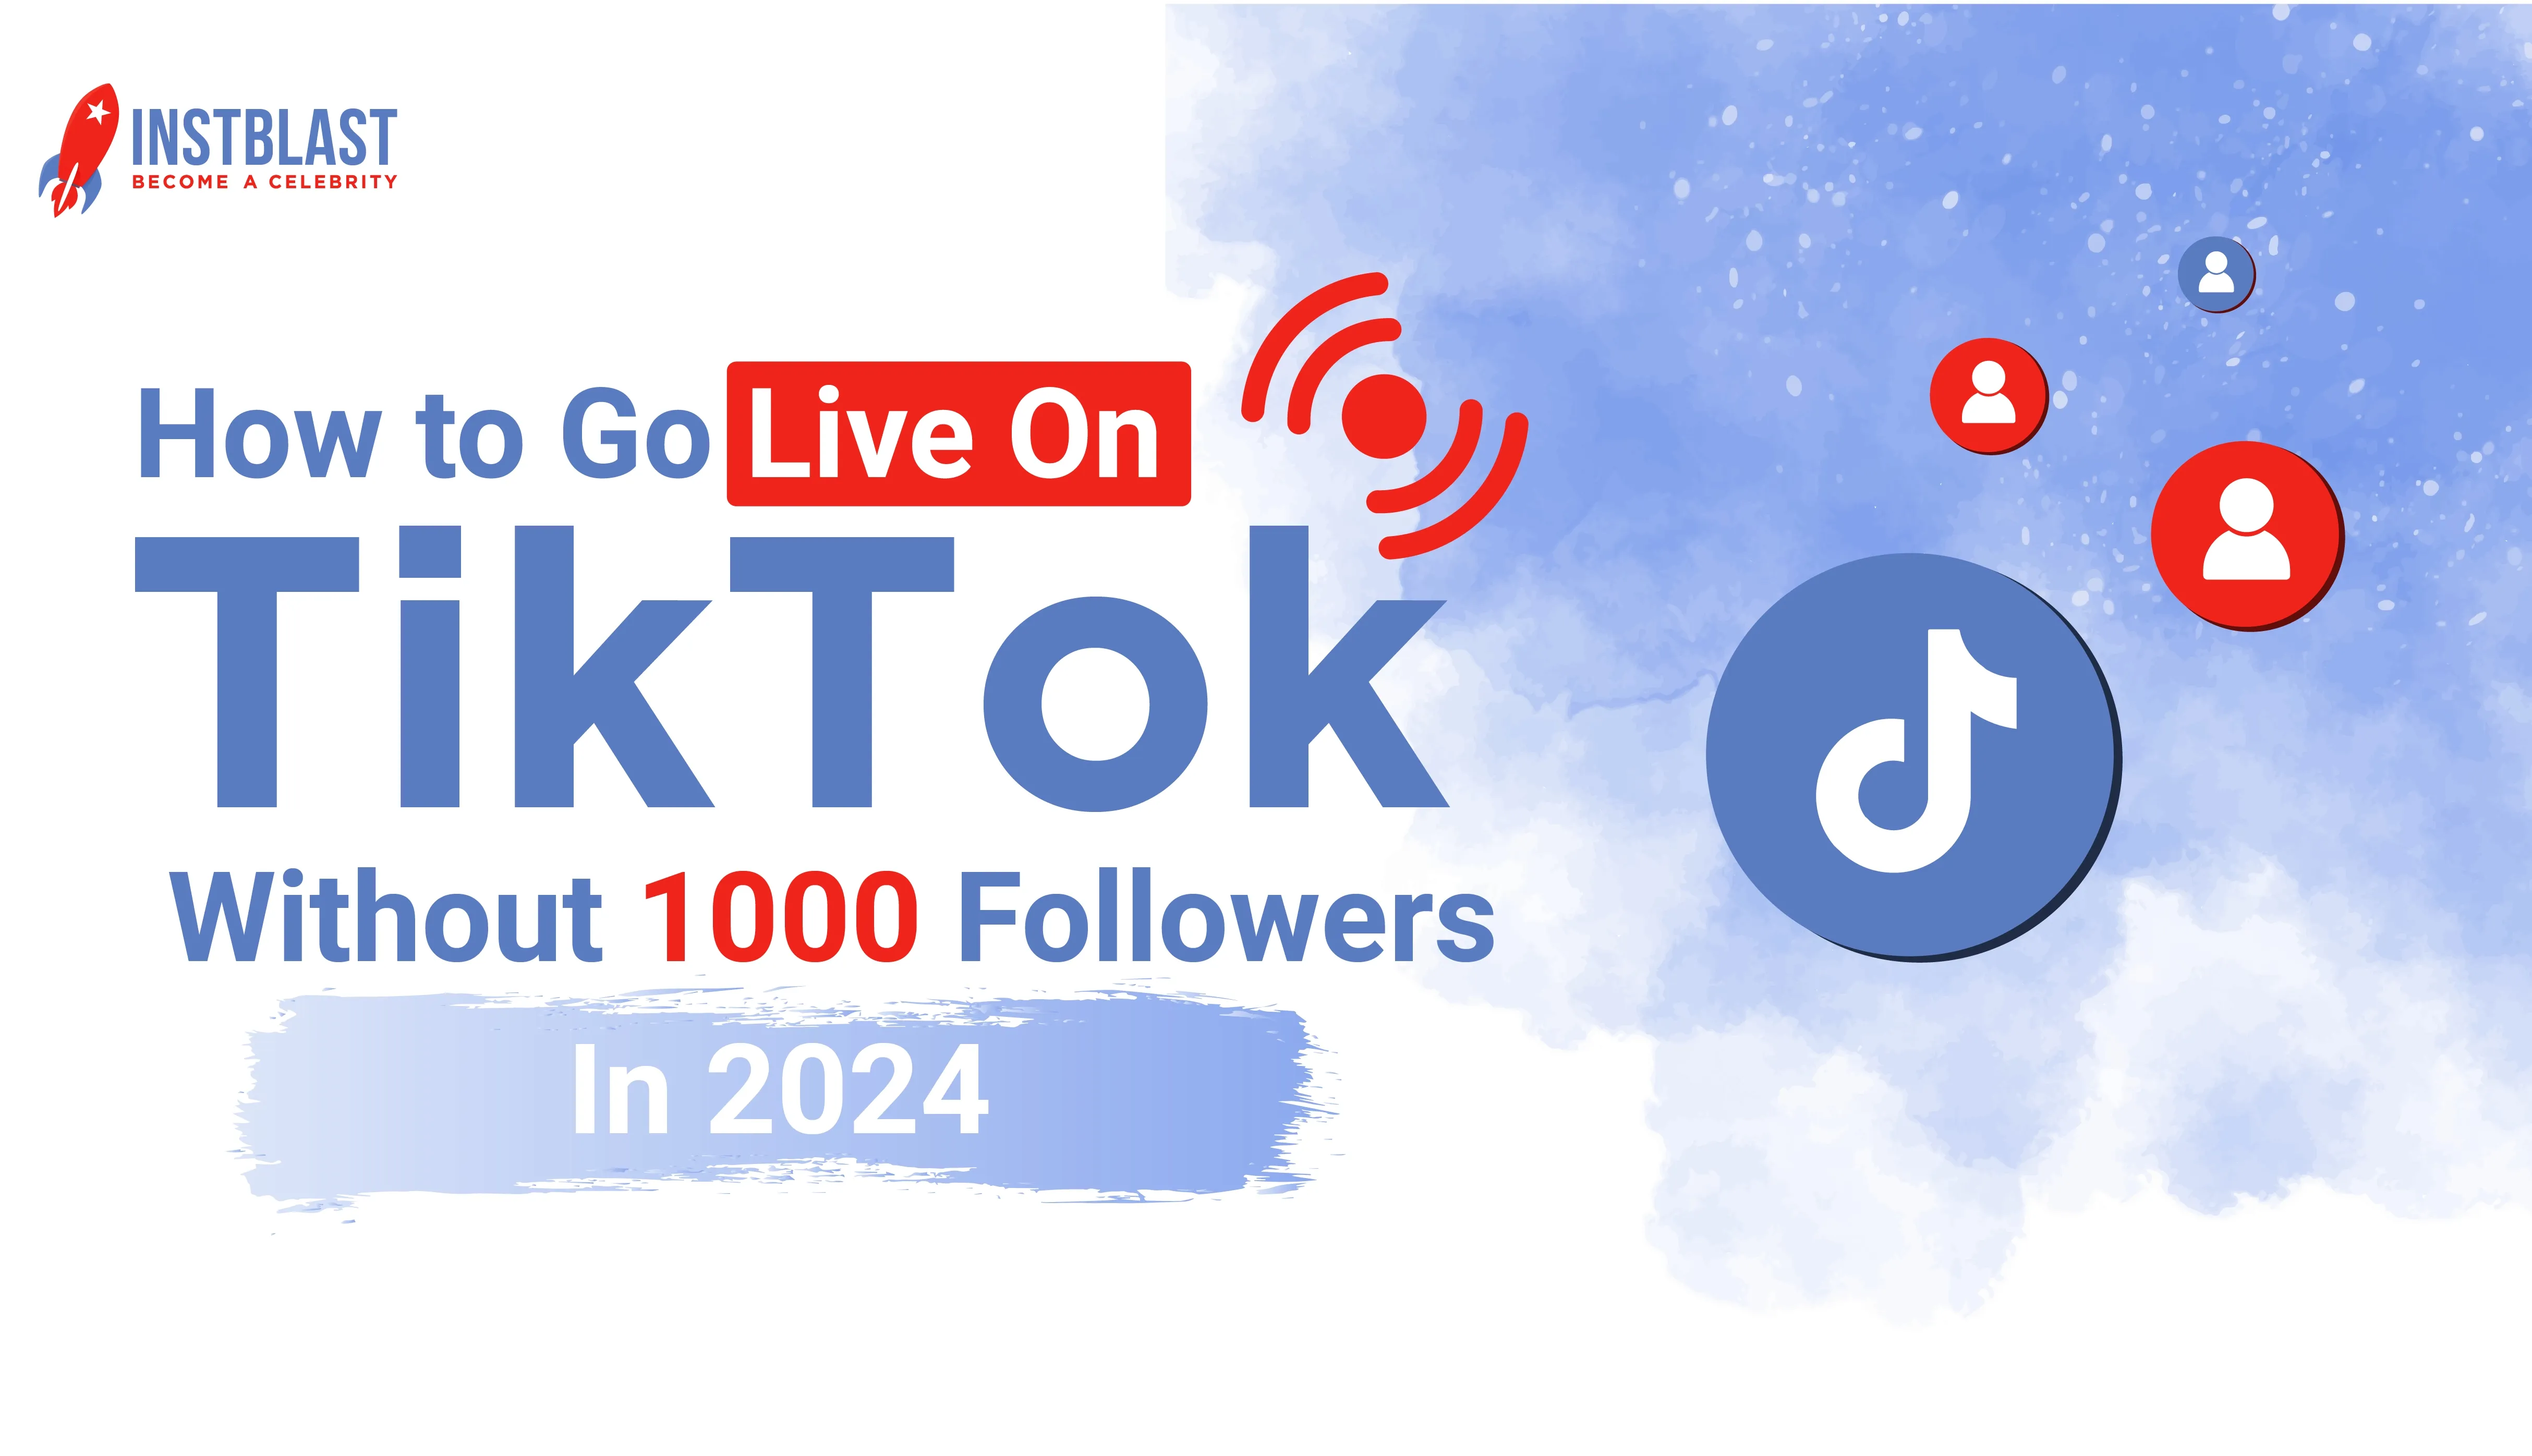 How to go live on TikTok without 1000 followers in 2024